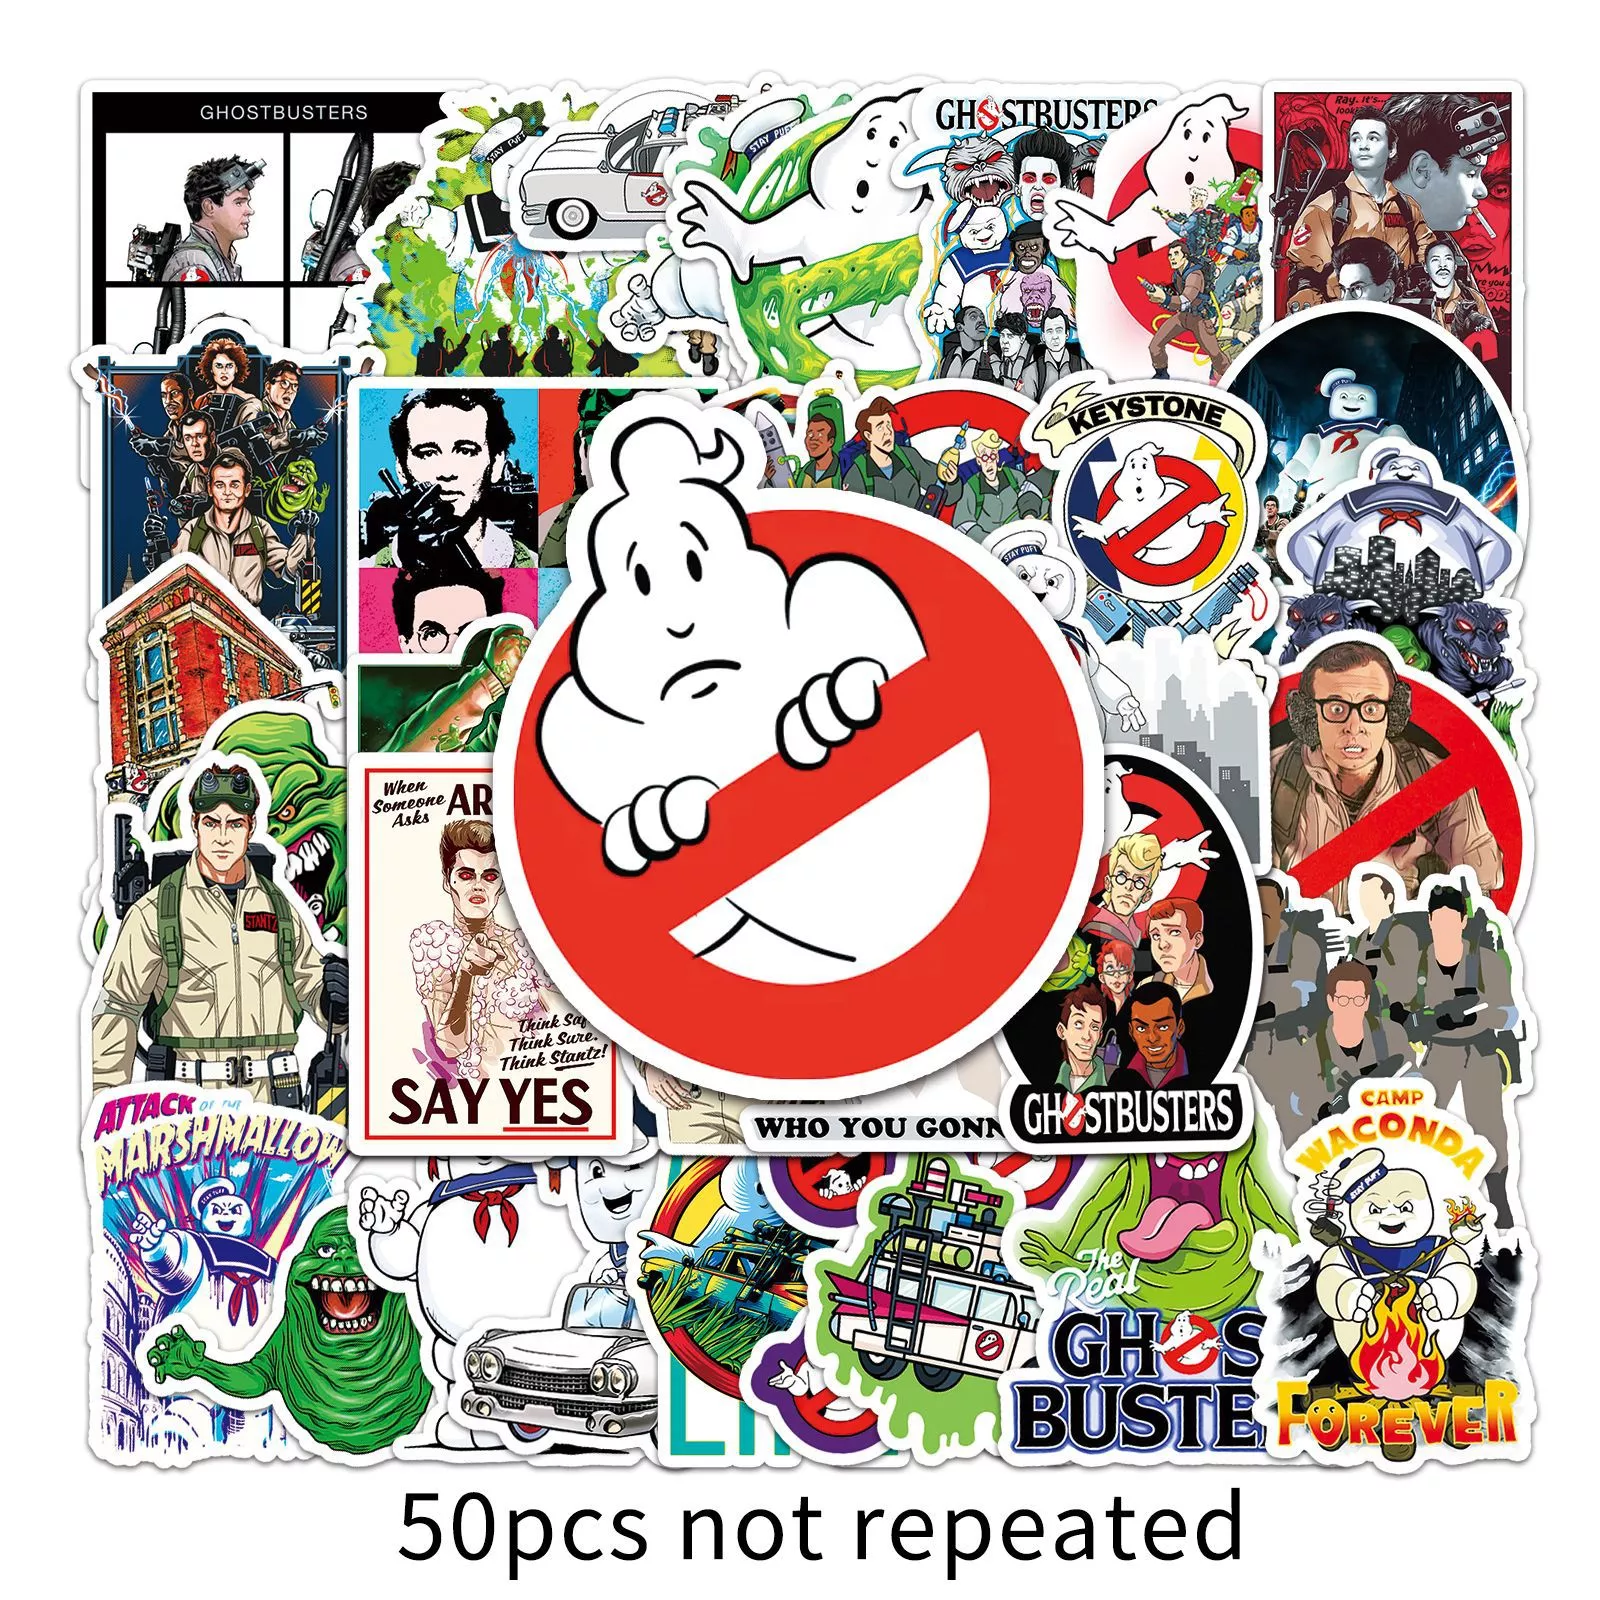 10/30/50pcs  Ghostbuster U.s. Drama Stickers Scooter Luggage Compartment Scrapbook Notebook Computer Diycar Motorcycle Stickers 10 30 50pcs no repeat satanism satan graffiti stickers suitcase luggage guitar refrigerator notebook stickers wholesale